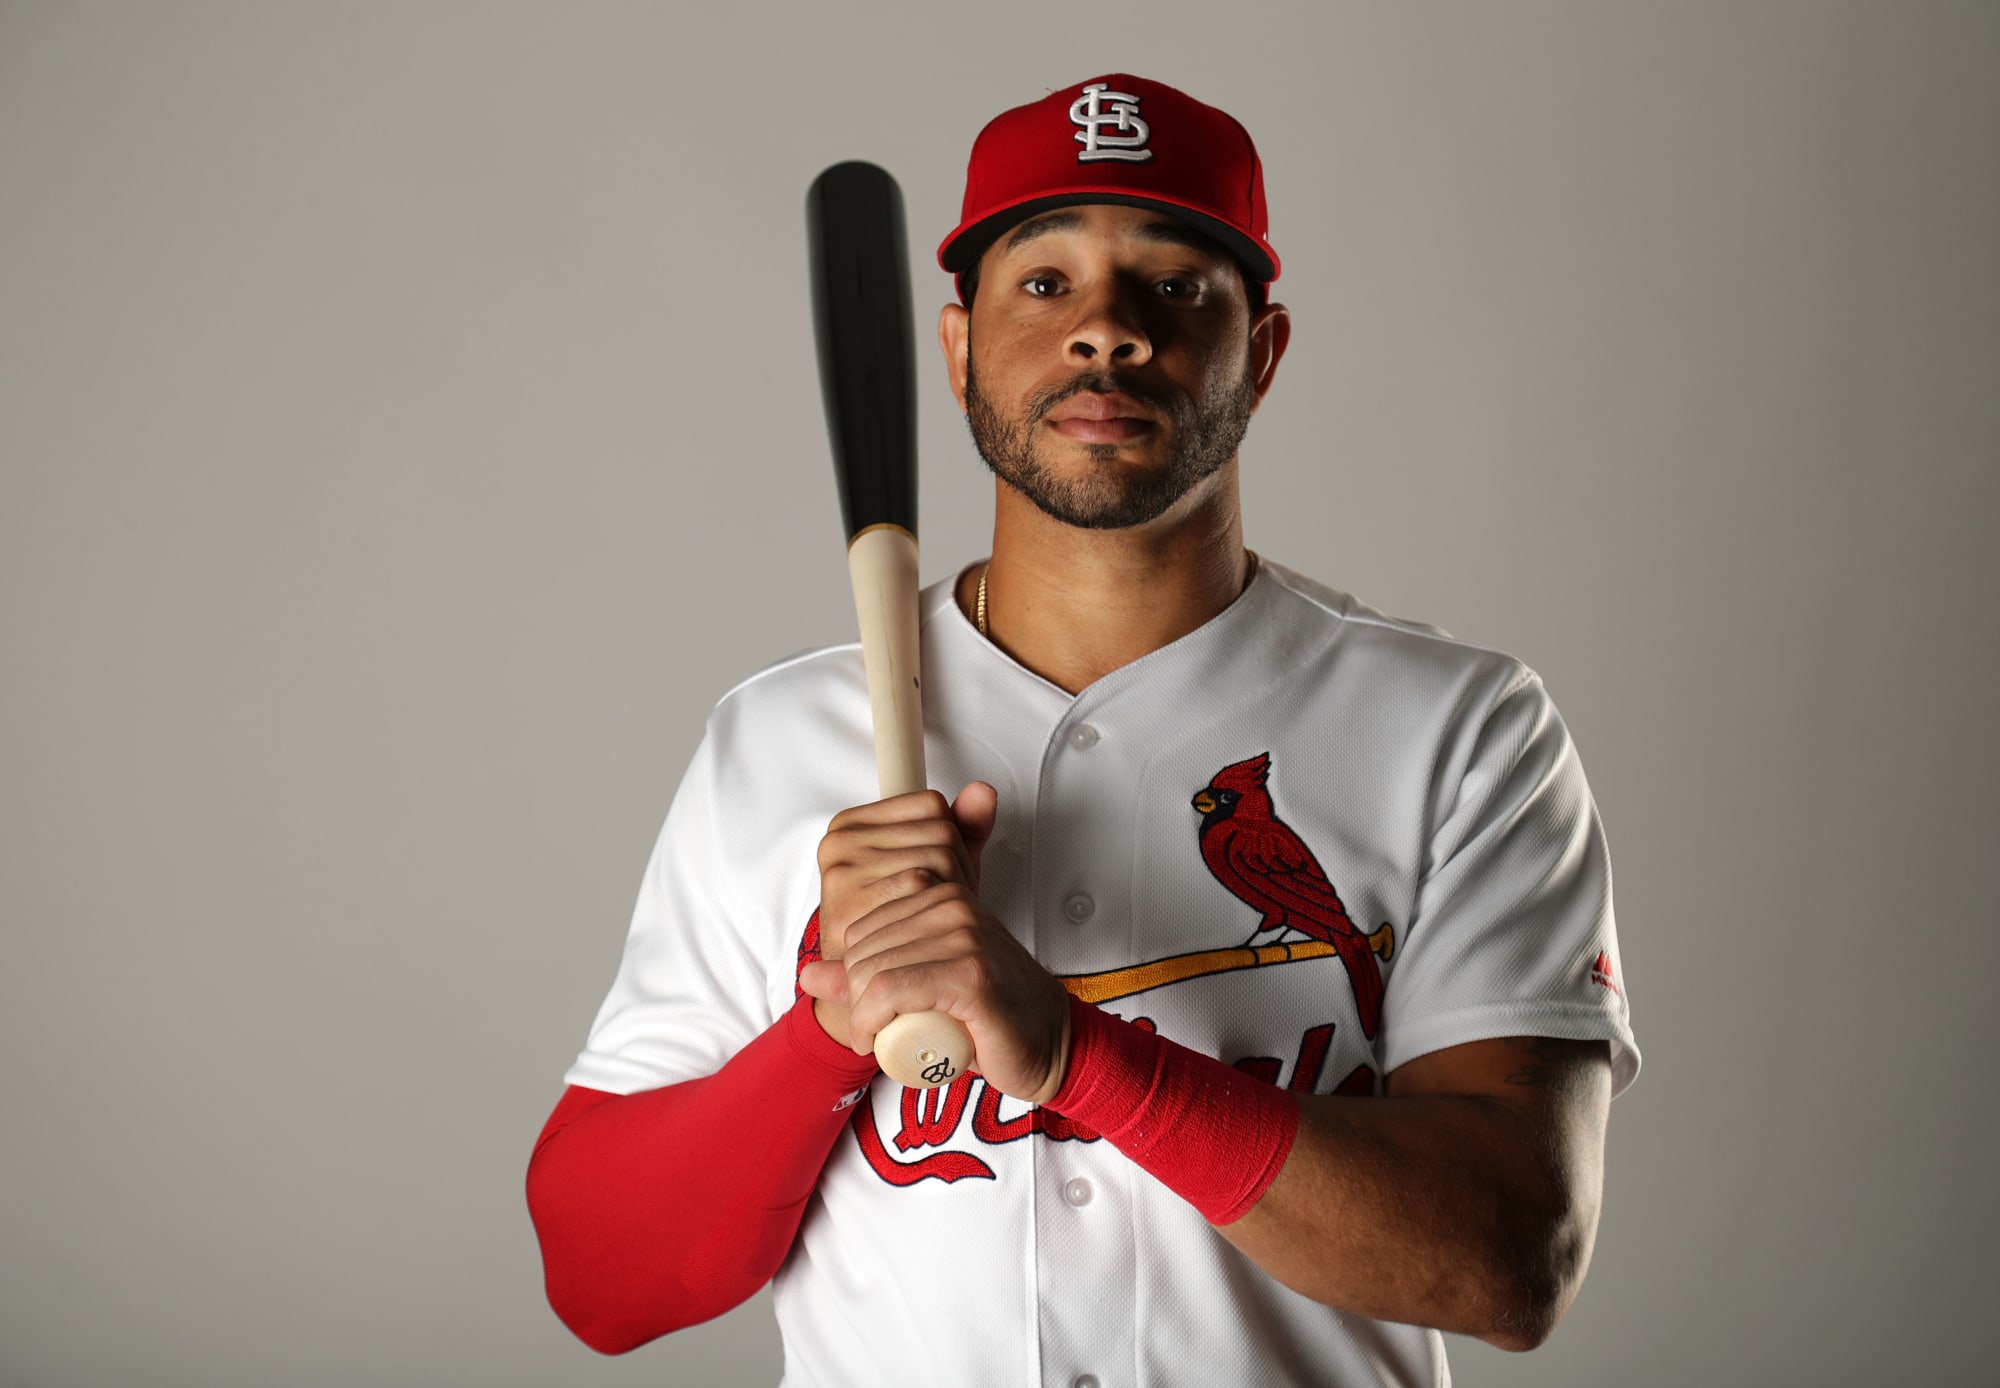 St. Louis Cardinals have their swagger back heading into 2018